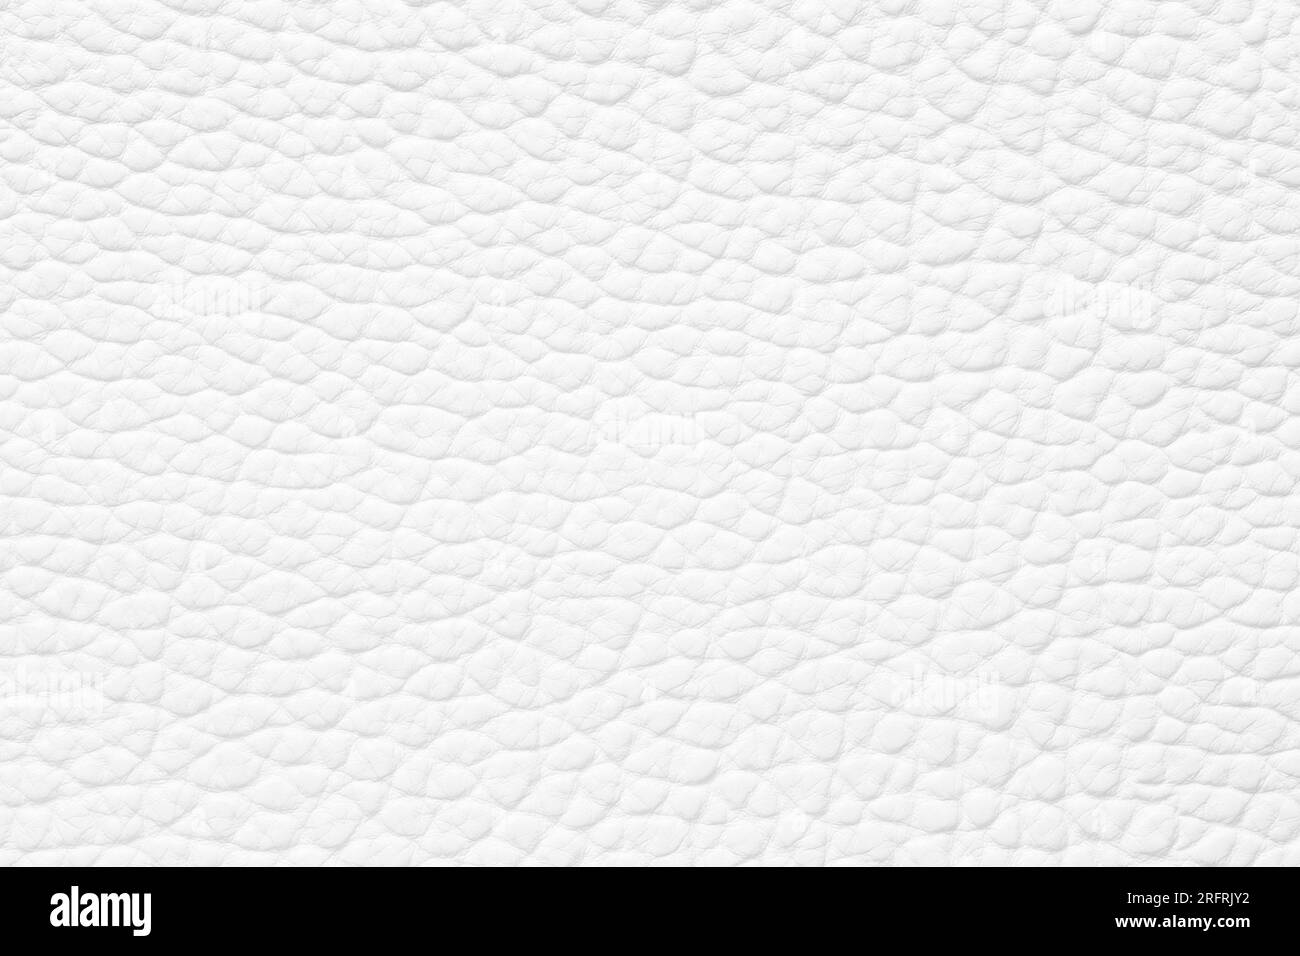 white leather texture background. animal skin with natural pattern Stock Photo